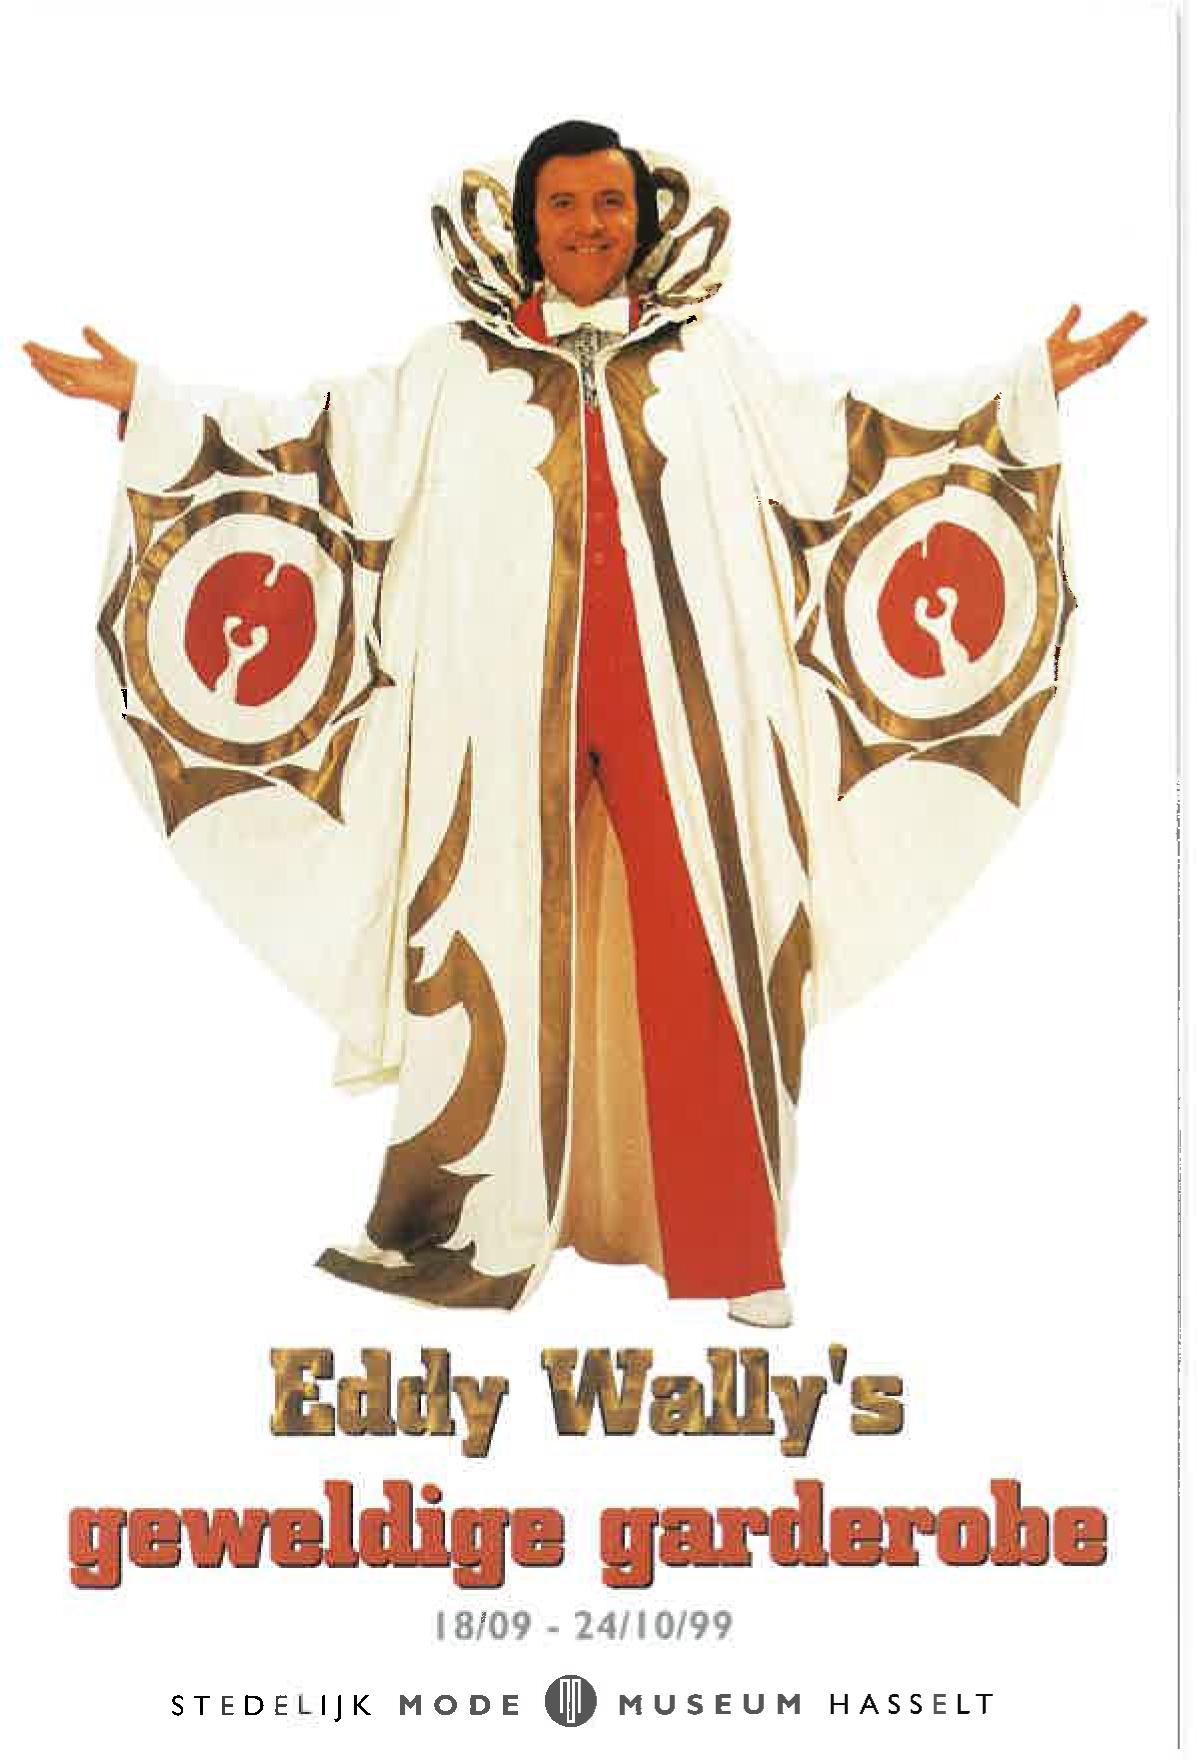 The first real exhibition about Eddy Wally's wardrobe took place in Hasselt's ModeMuseum